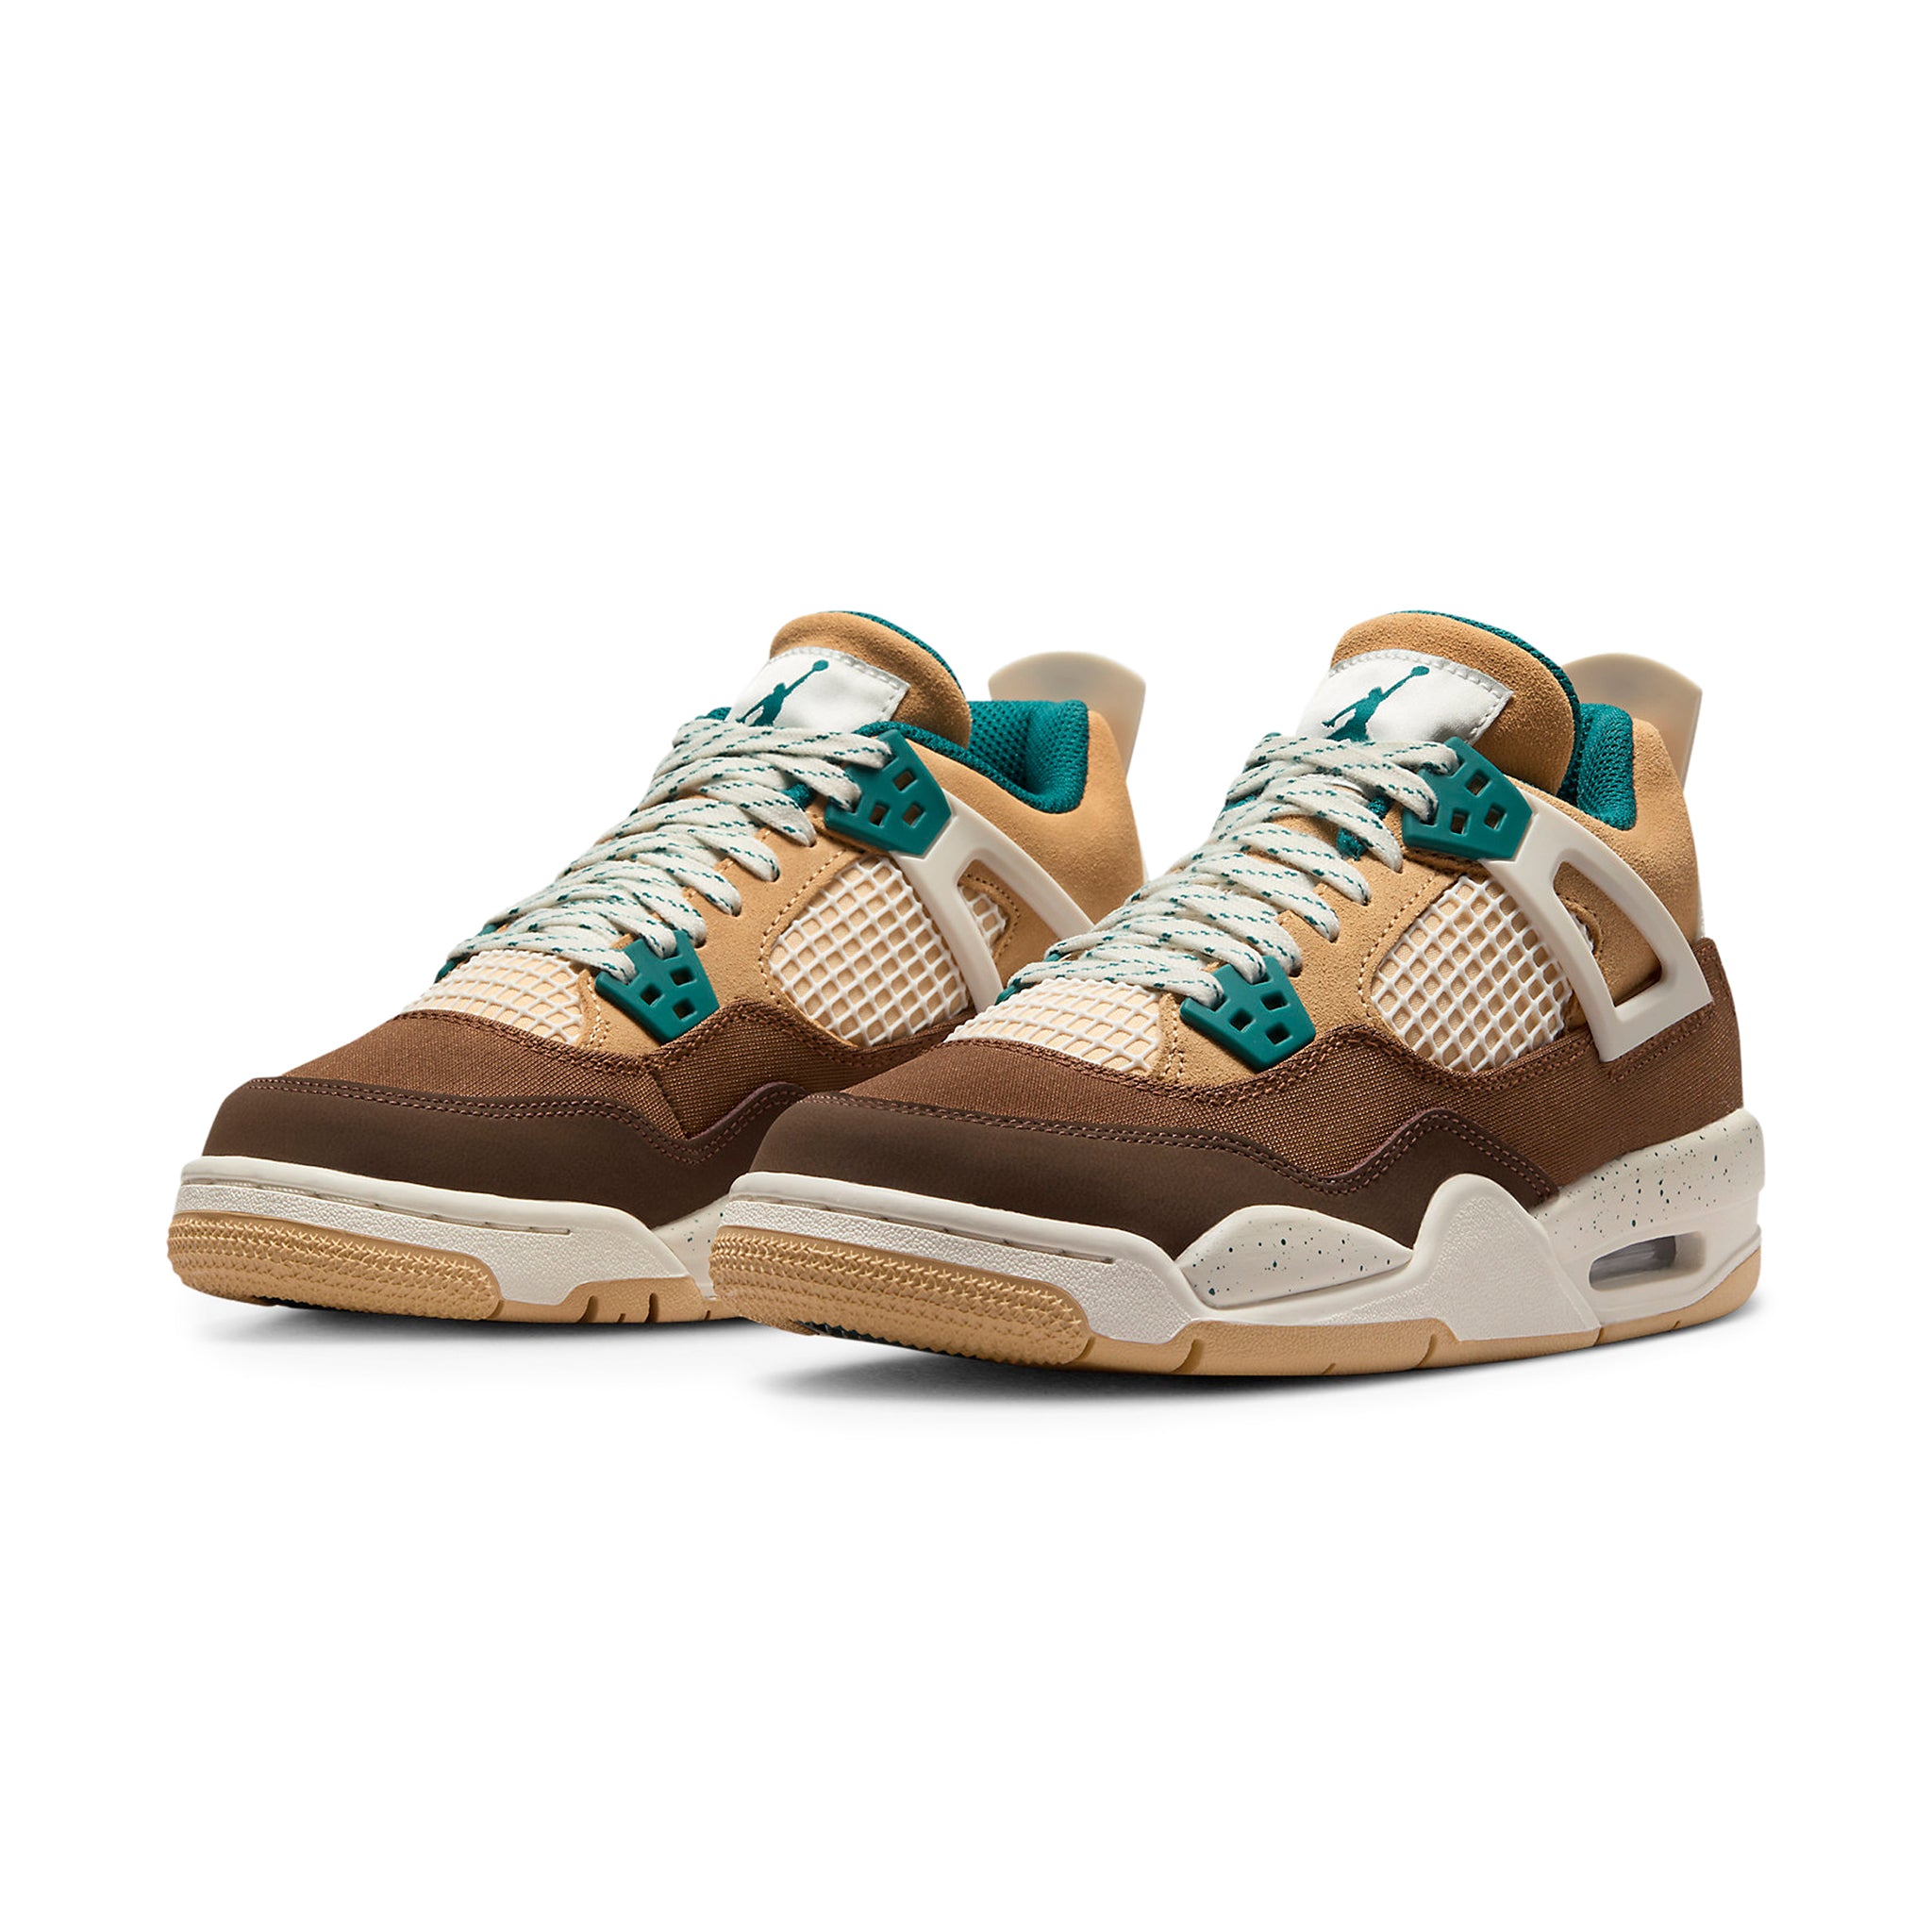 Front side view of Air Jordan 4 Retro Cacao Wow (GS) FB2214-200